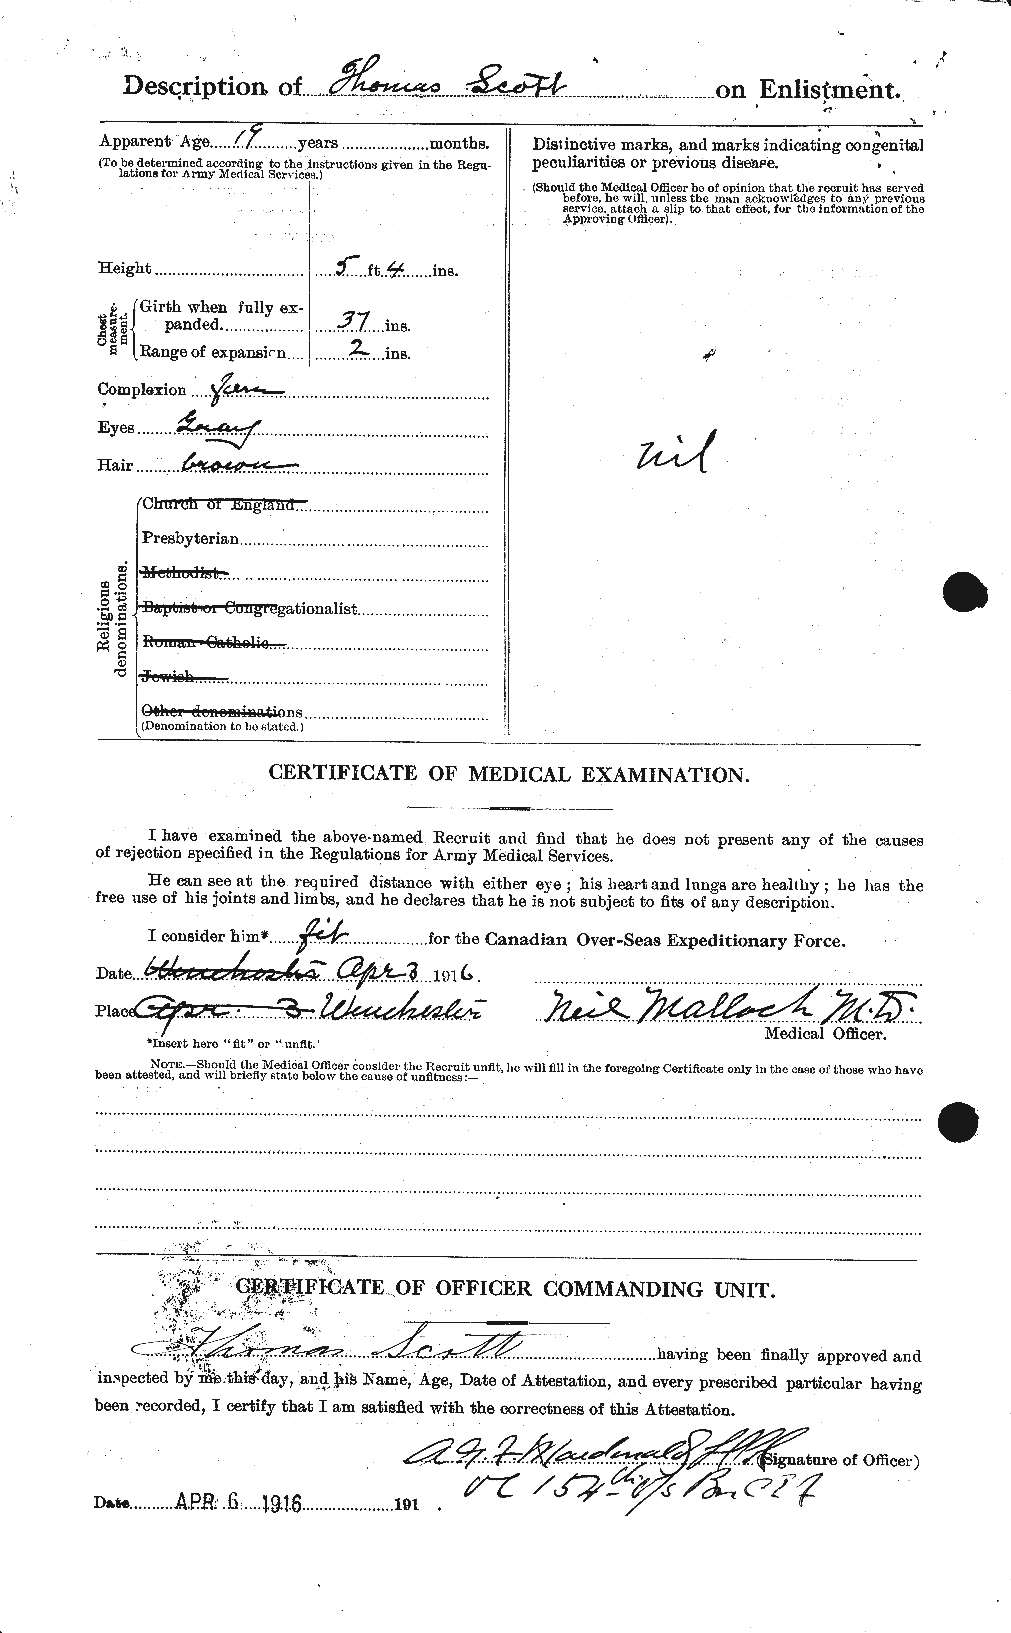 Personnel Records of the First World War - CEF 088541b